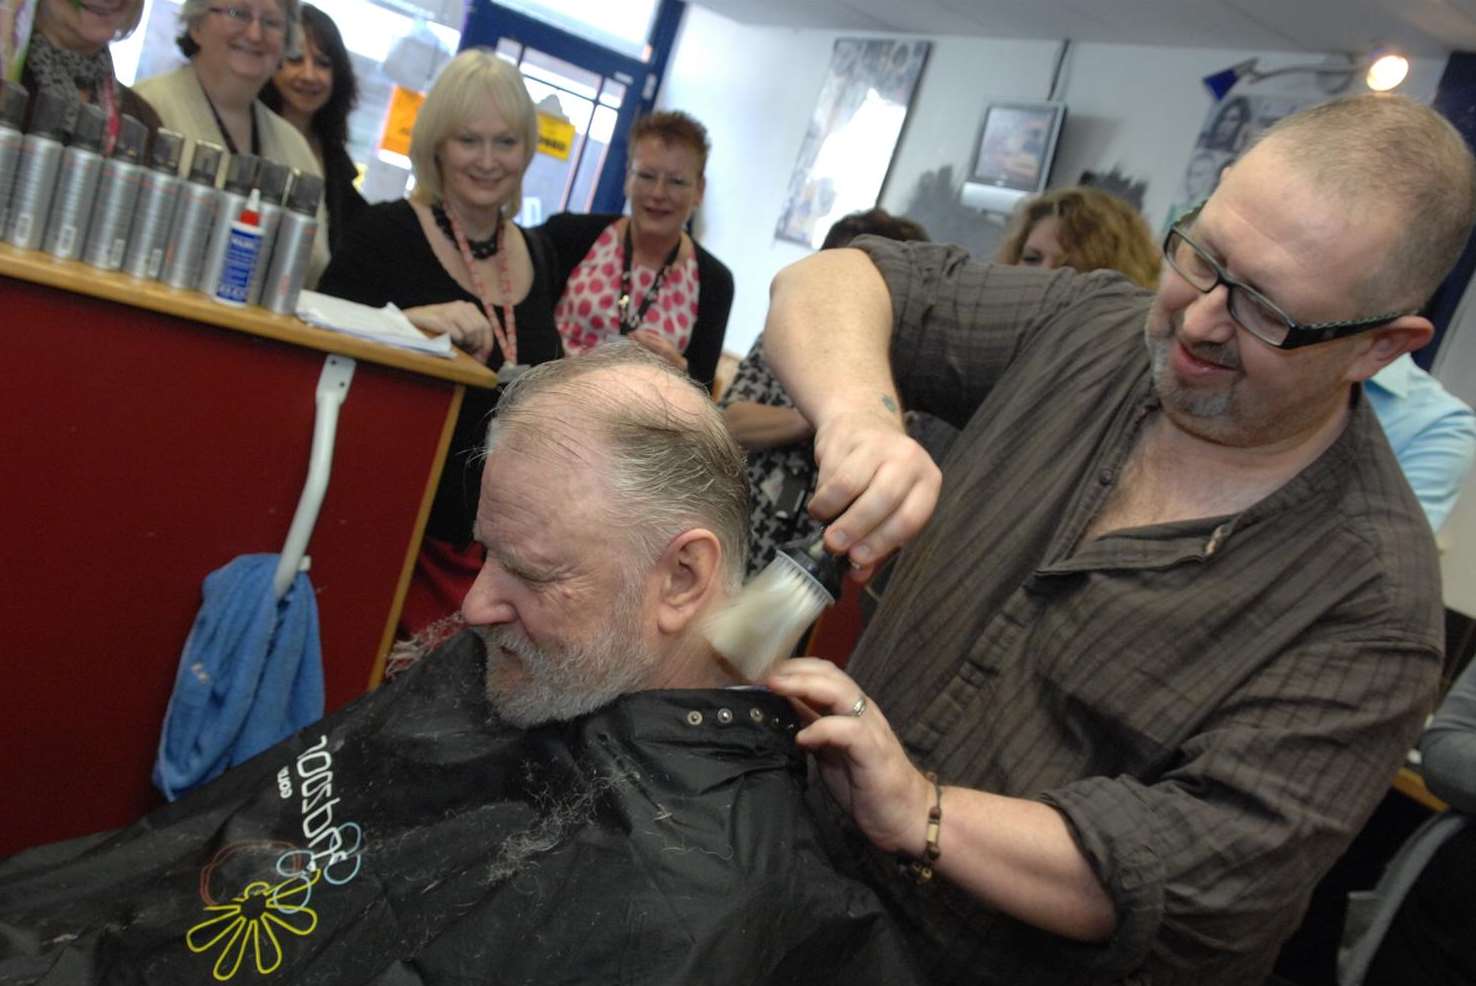 Barber Kevin Almond cut hair in Herne Bay for 32 years